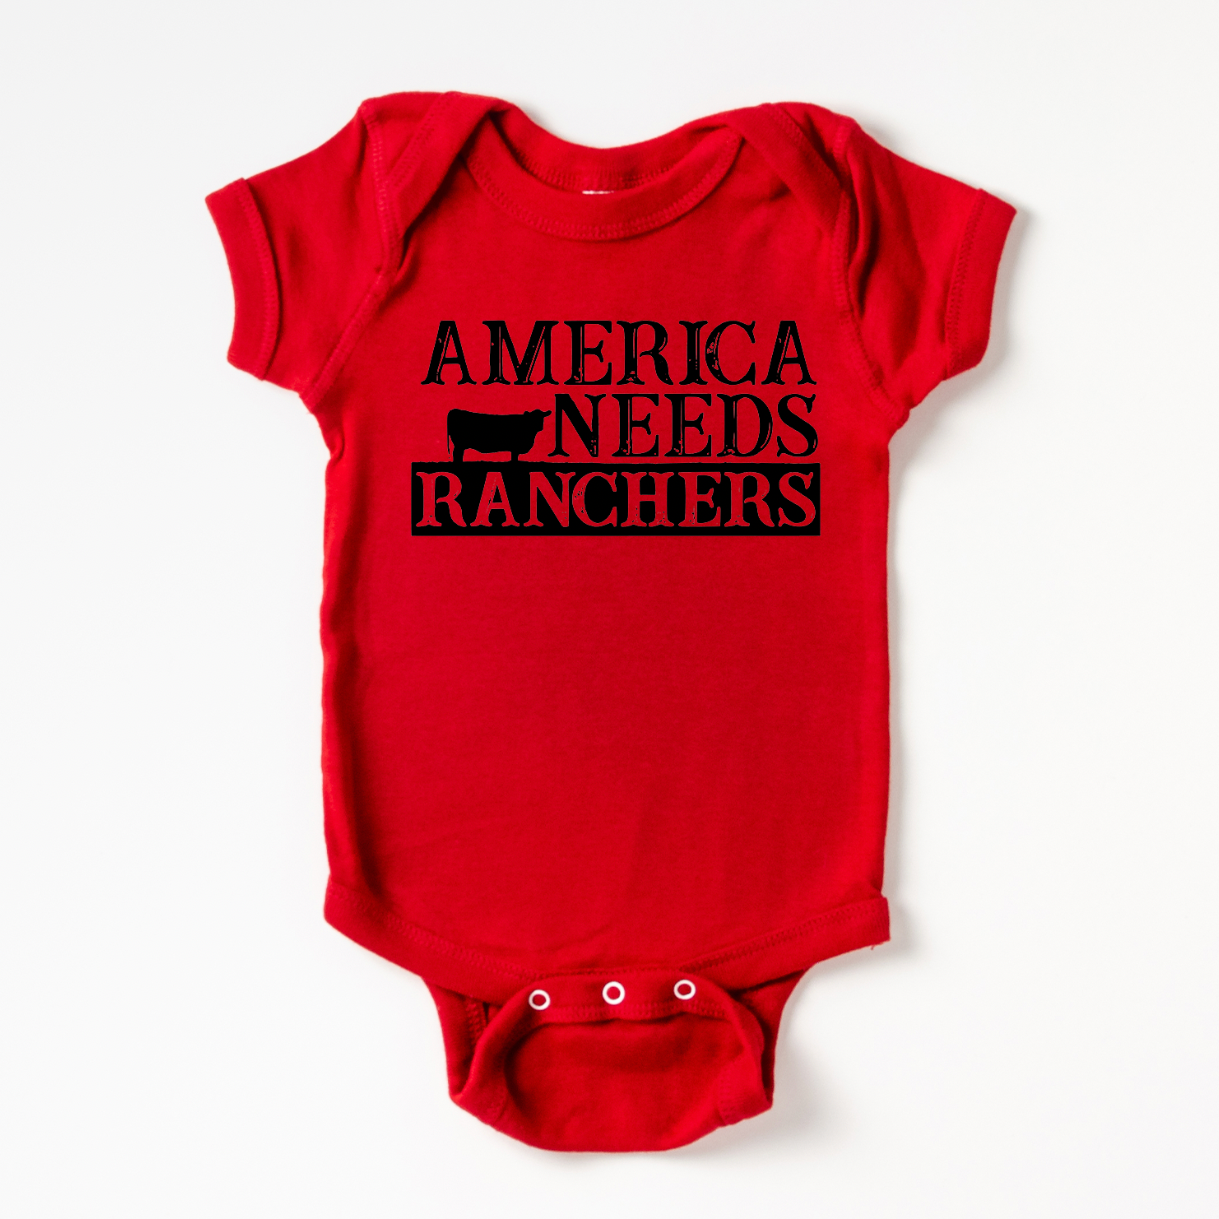 America Needs Ranchers One Piece/T-Shirt (Newborn - Youth XL) - Multiple Colors!